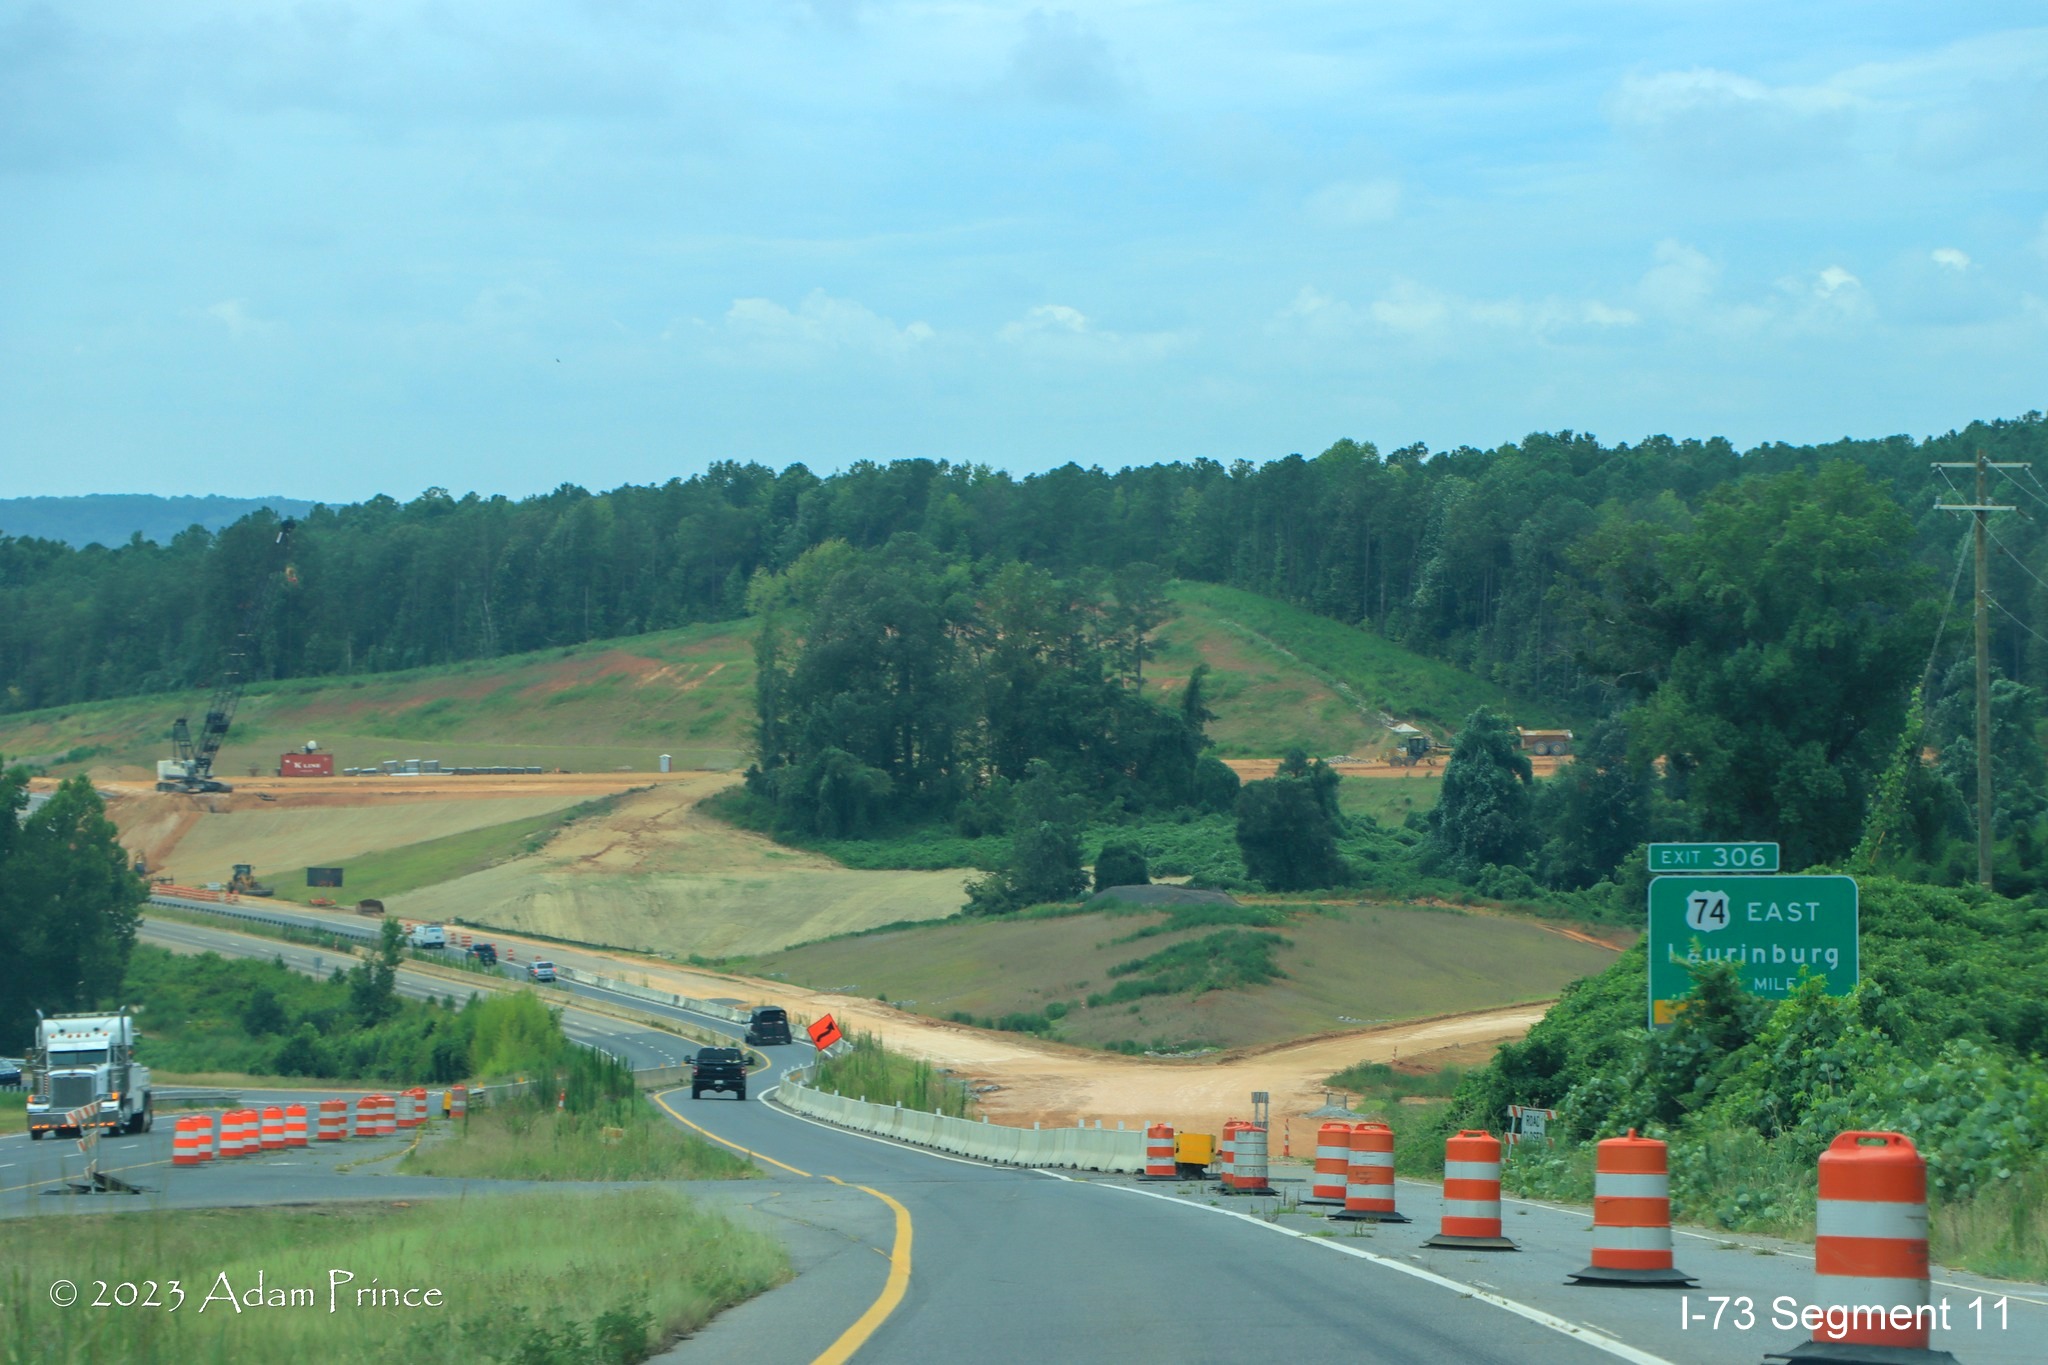 Image of ramp and lane construction along Business 74 West for future I-73/I-74 Rockingham
        Bypass, Adam Prince July 2023